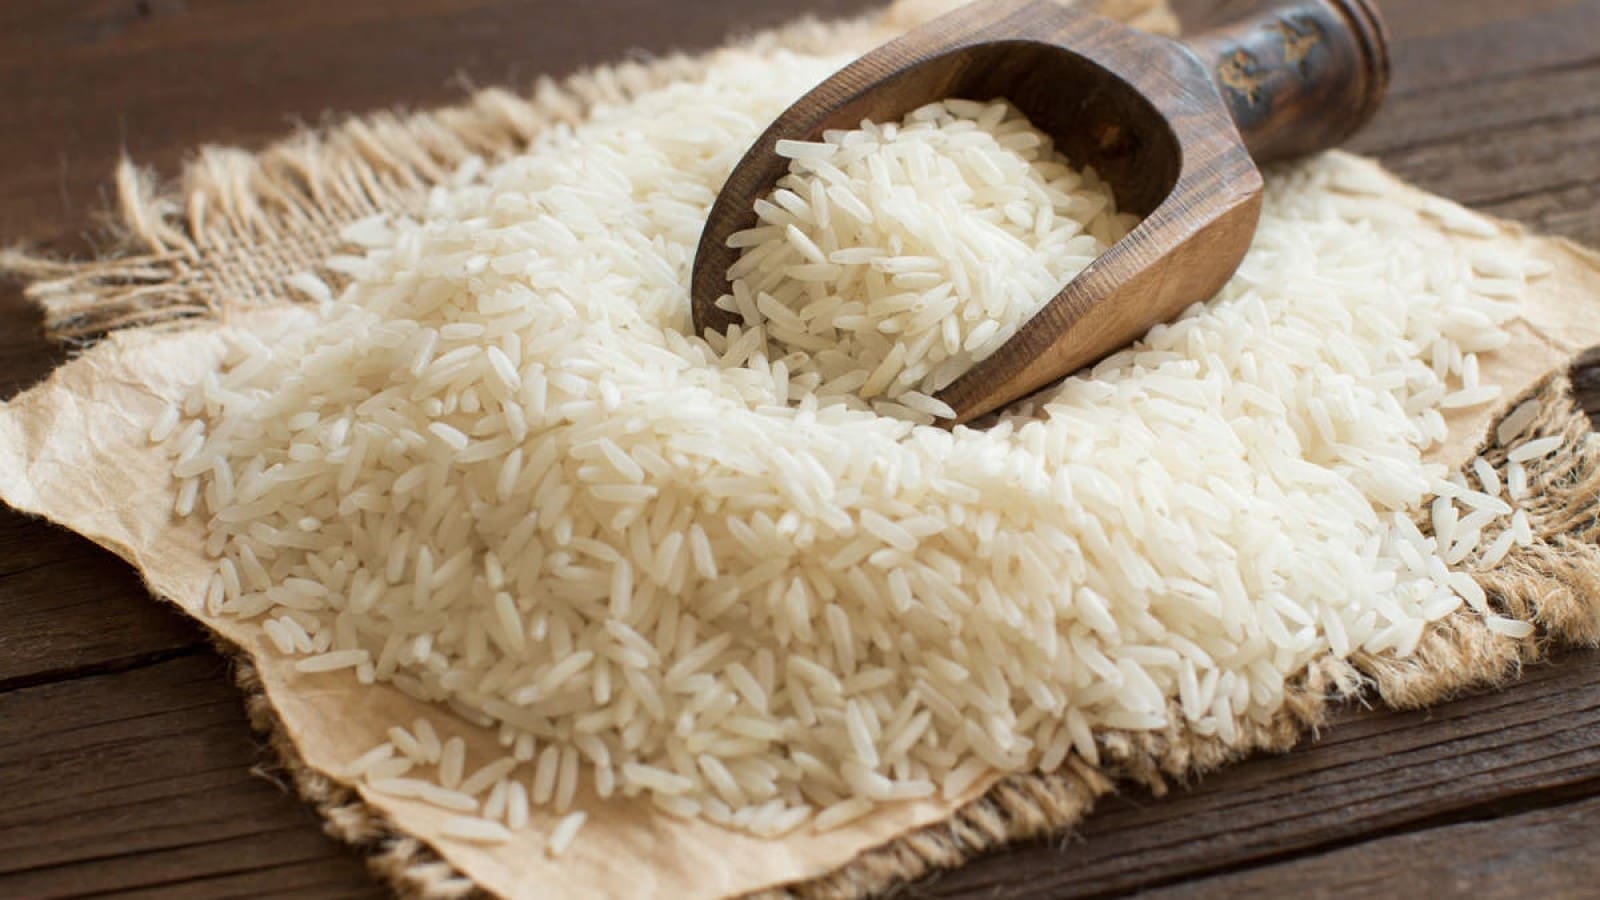 Nigeria’s rice imports to be among the highest globally in 2024: USDA